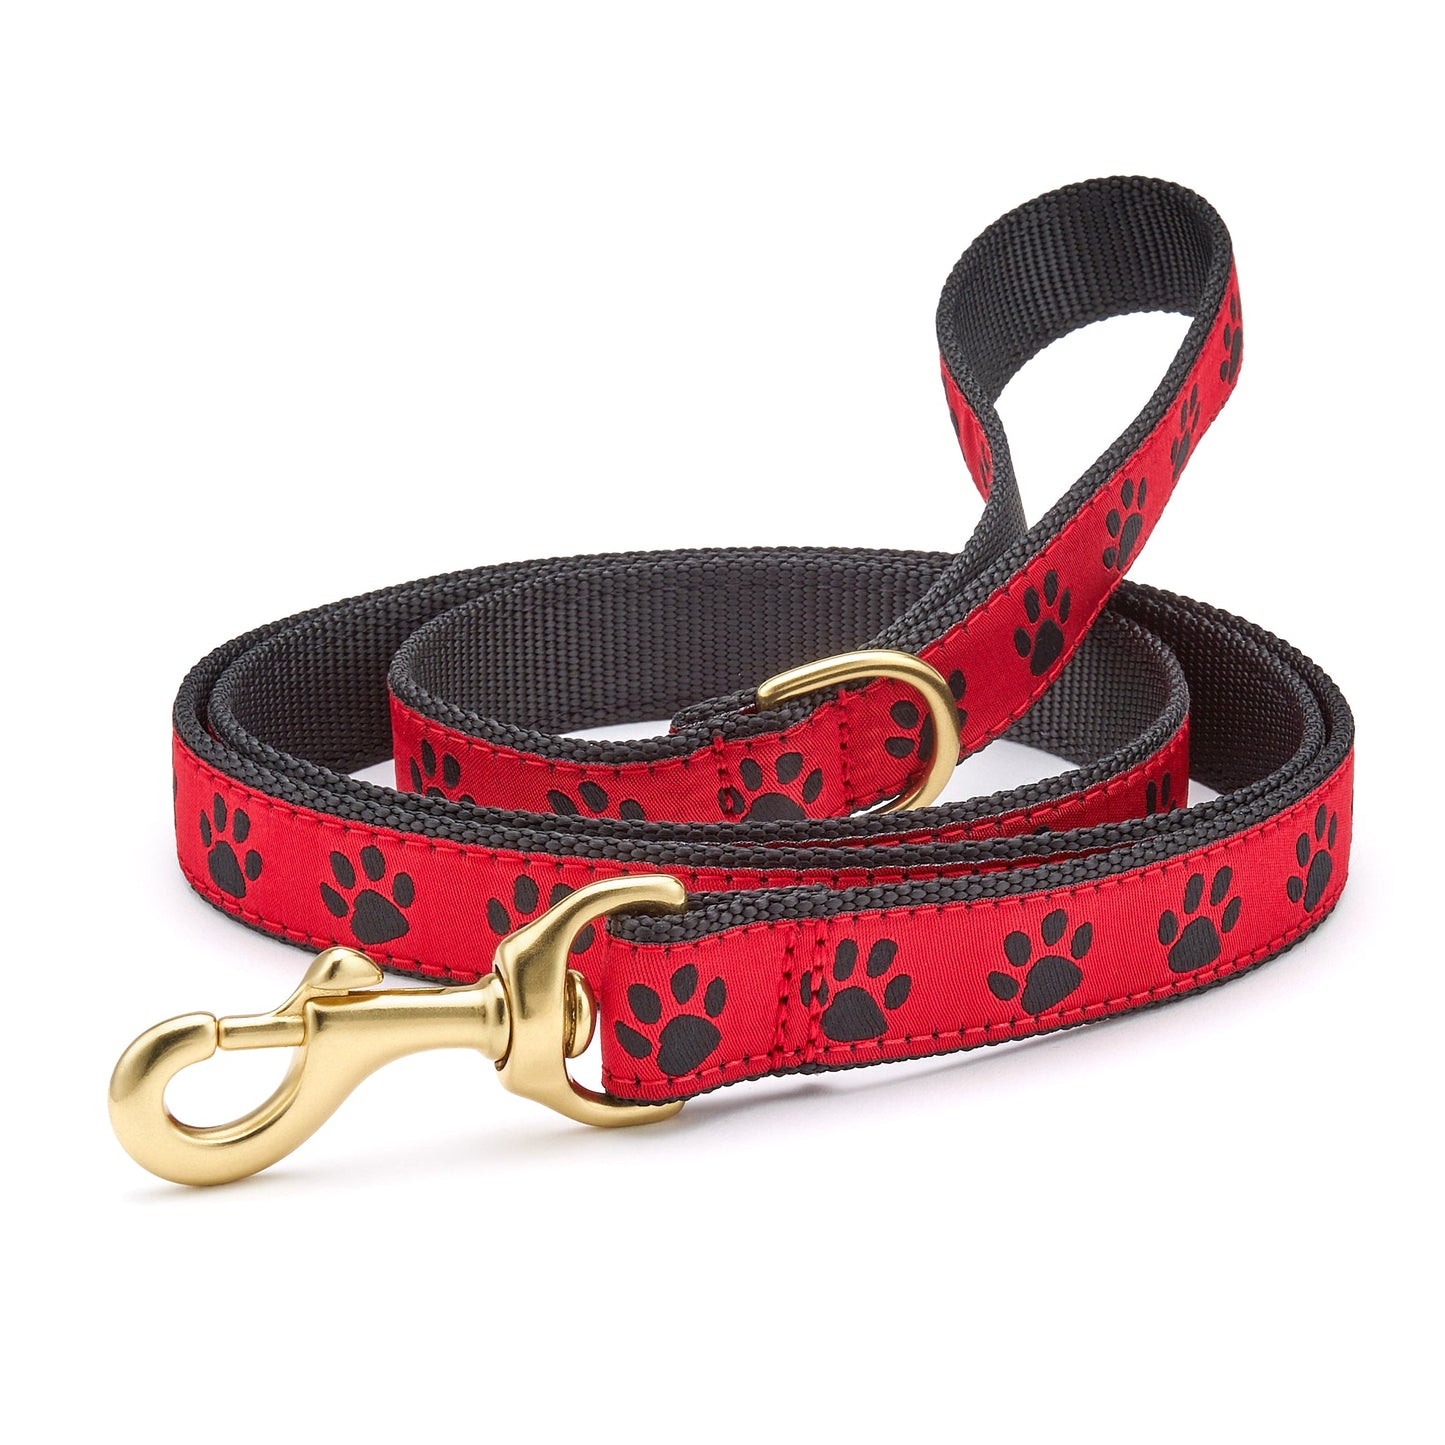 Red and Black Paw Dog Lead by Up Country